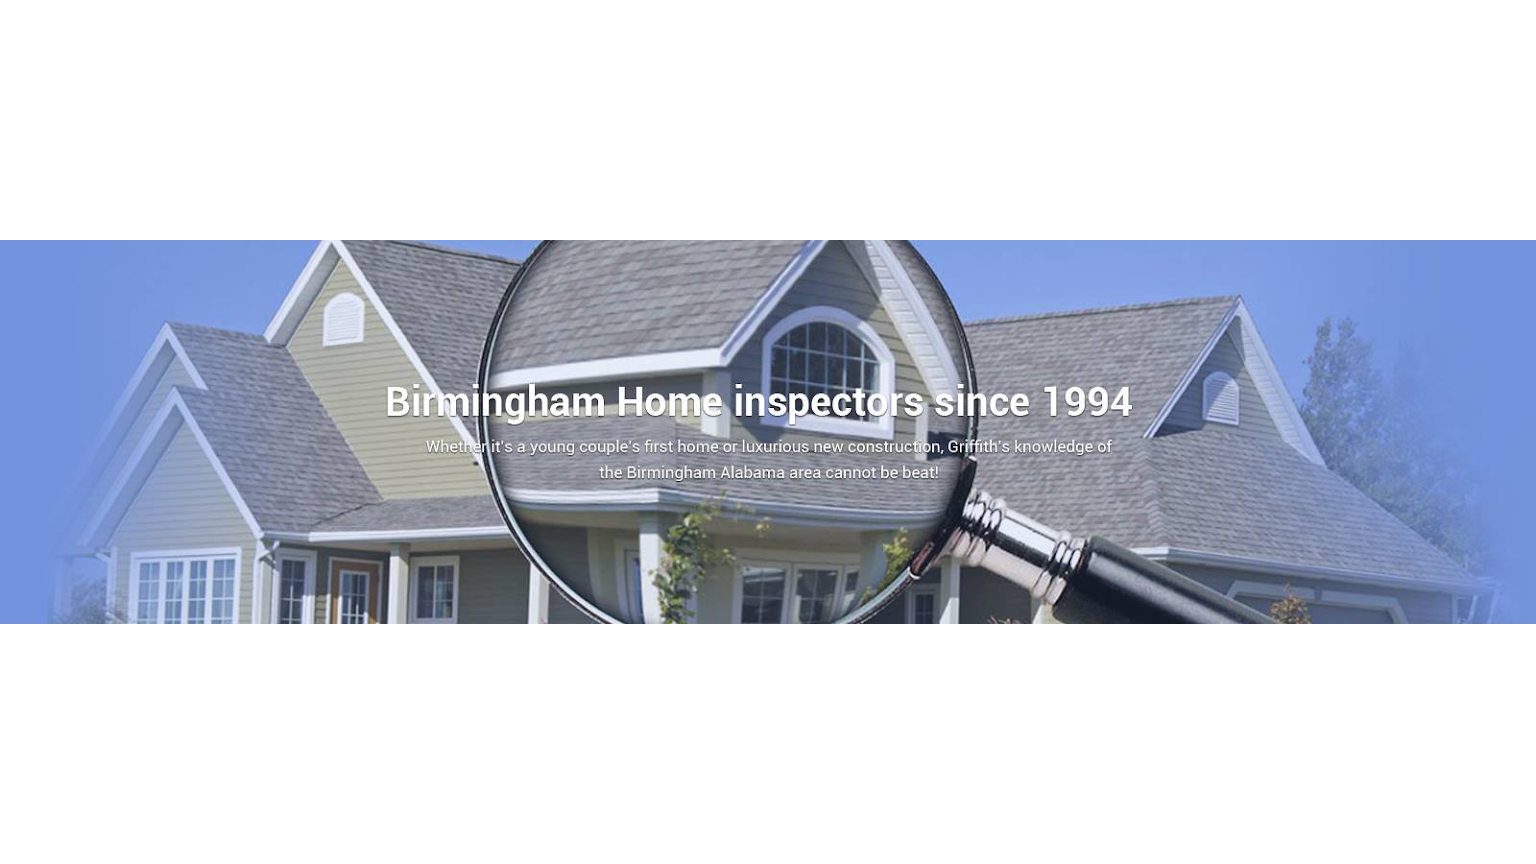 How Long Do Home Inspections Take